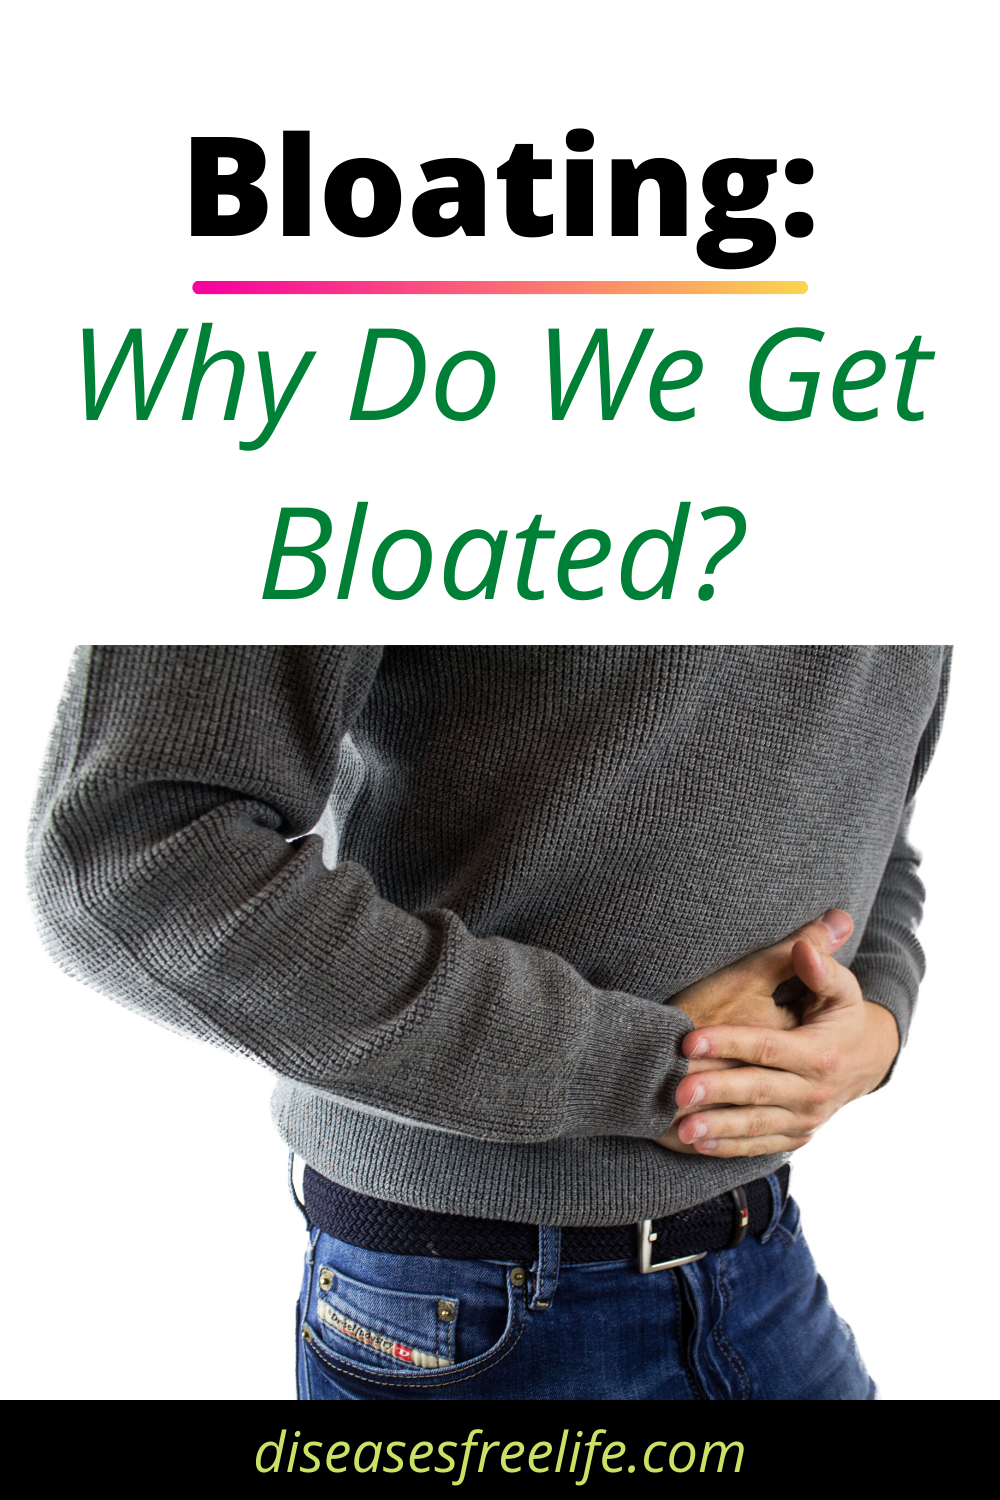 Bloating: Why Do We Get Bloated?